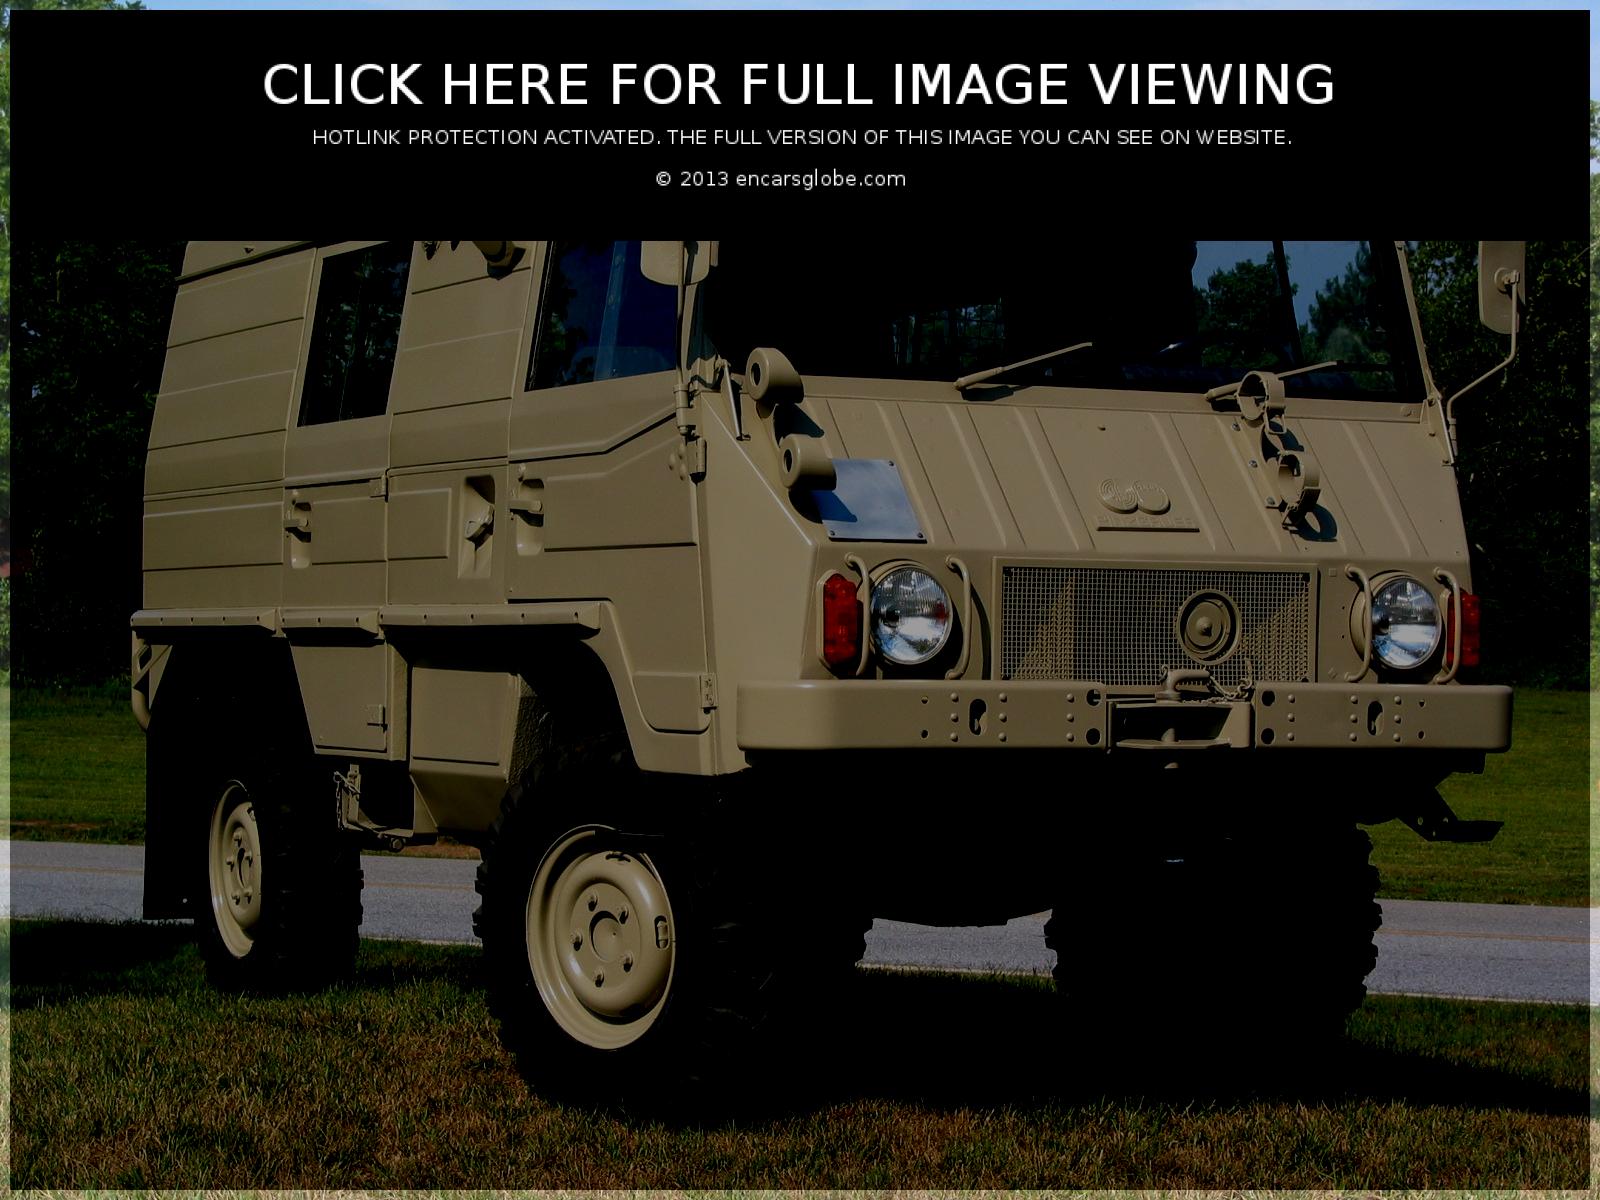 Steyr-Puch Pinzgauer PPV Photo Gallery: Photo #01 out of 12, Image ...